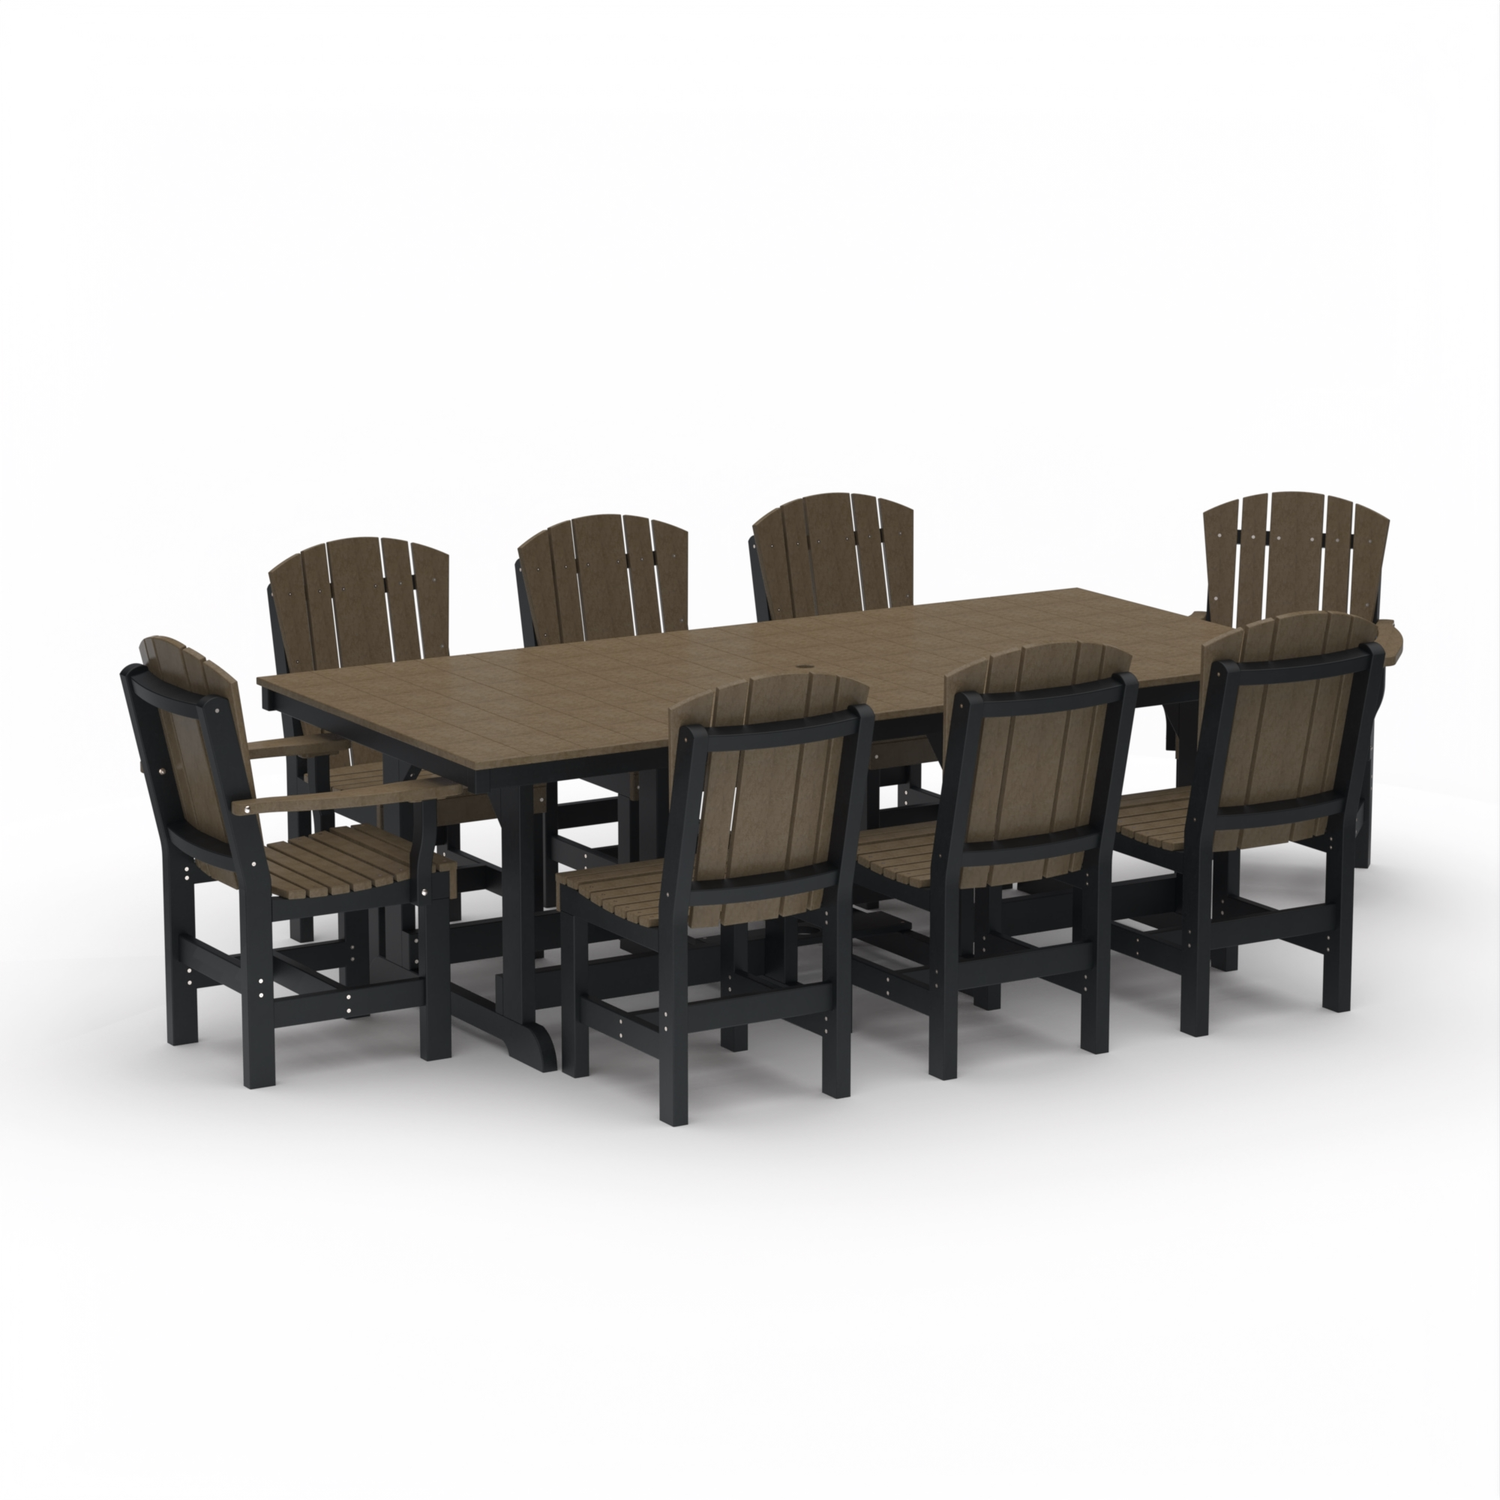 Wildridge Outdoor Recycled Plastic Dining Sets